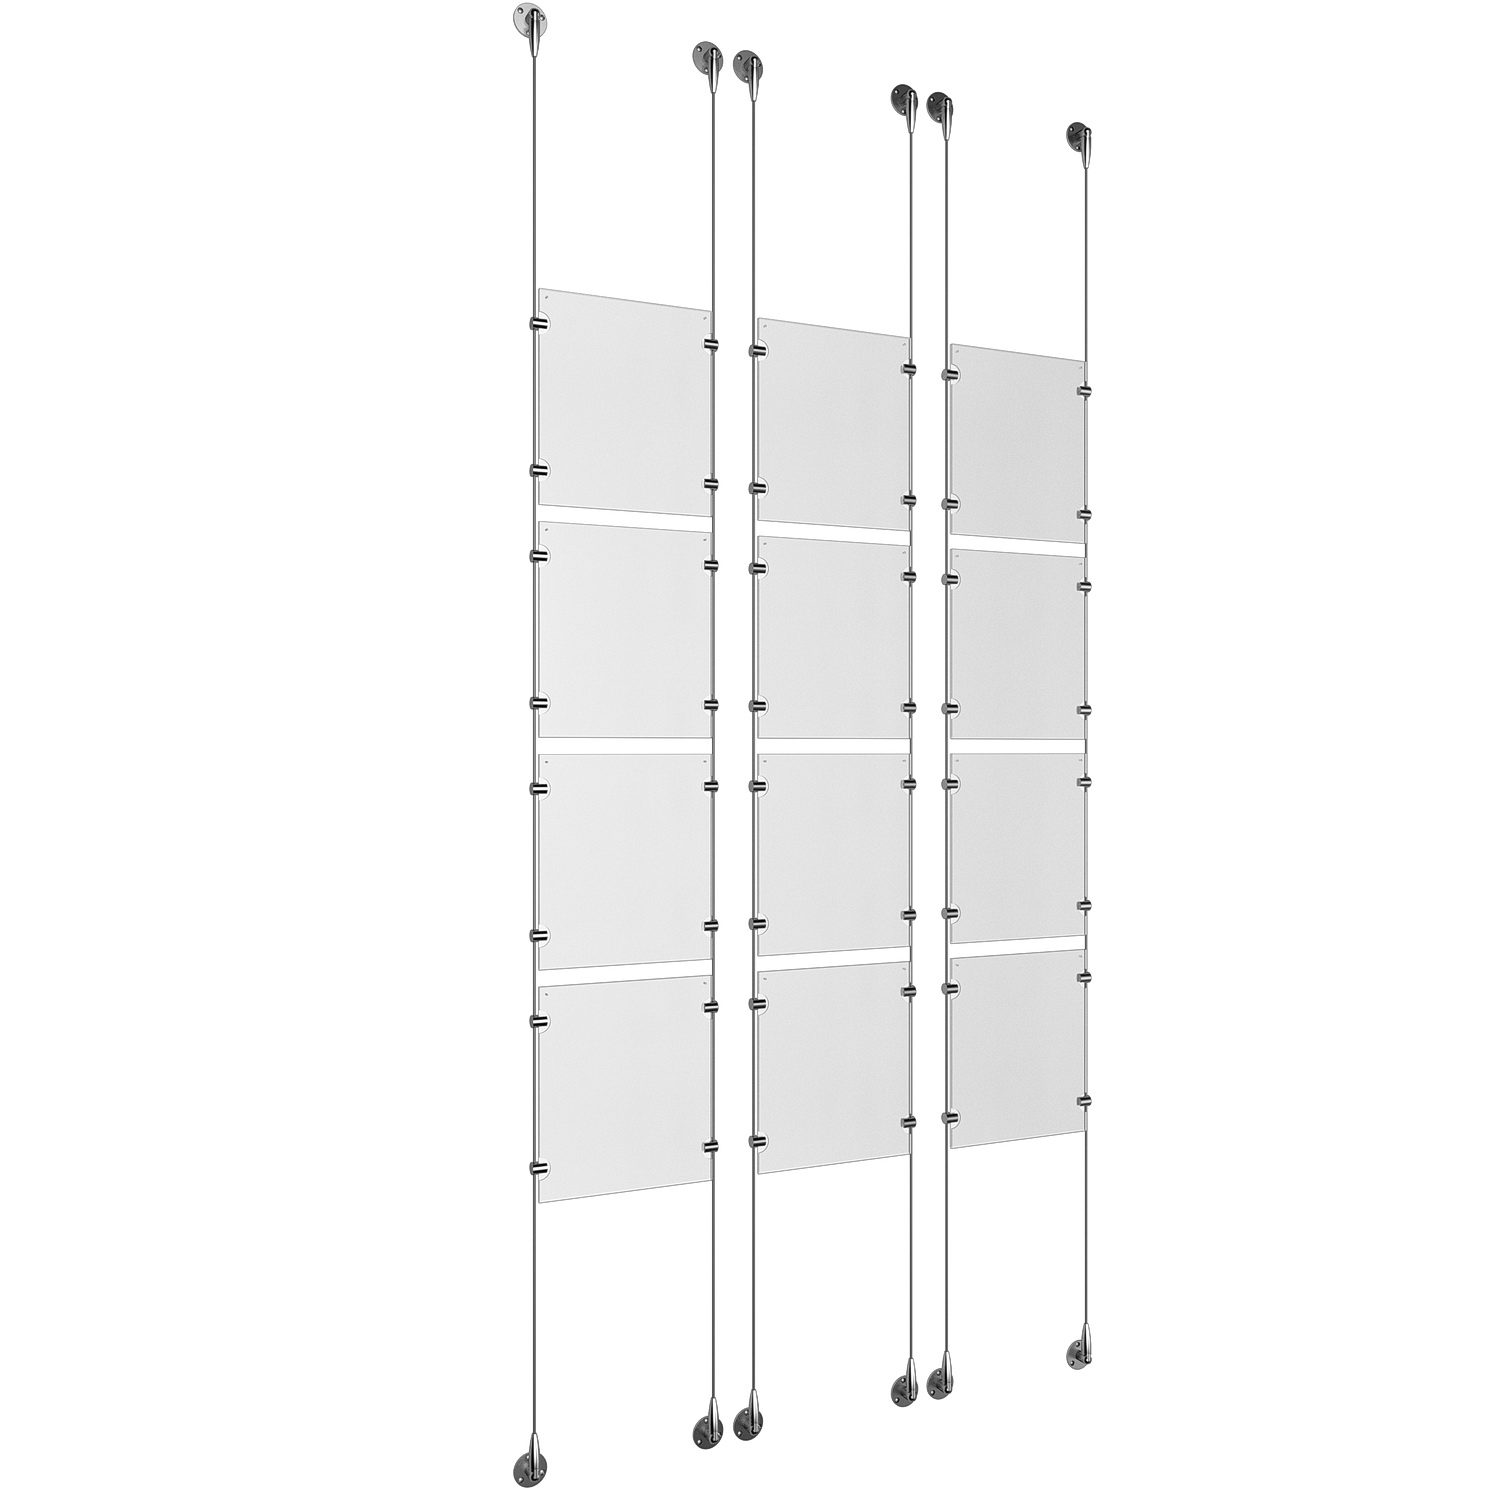 (12) 8-1/2'' Width x 11'' Height Clear Acrylic Frame & (6) Aluminum Clear Anodized Adjustable Angle Signature 1/8'' Diameter Cable Systems with (48) Single-Sided Panel Grippers